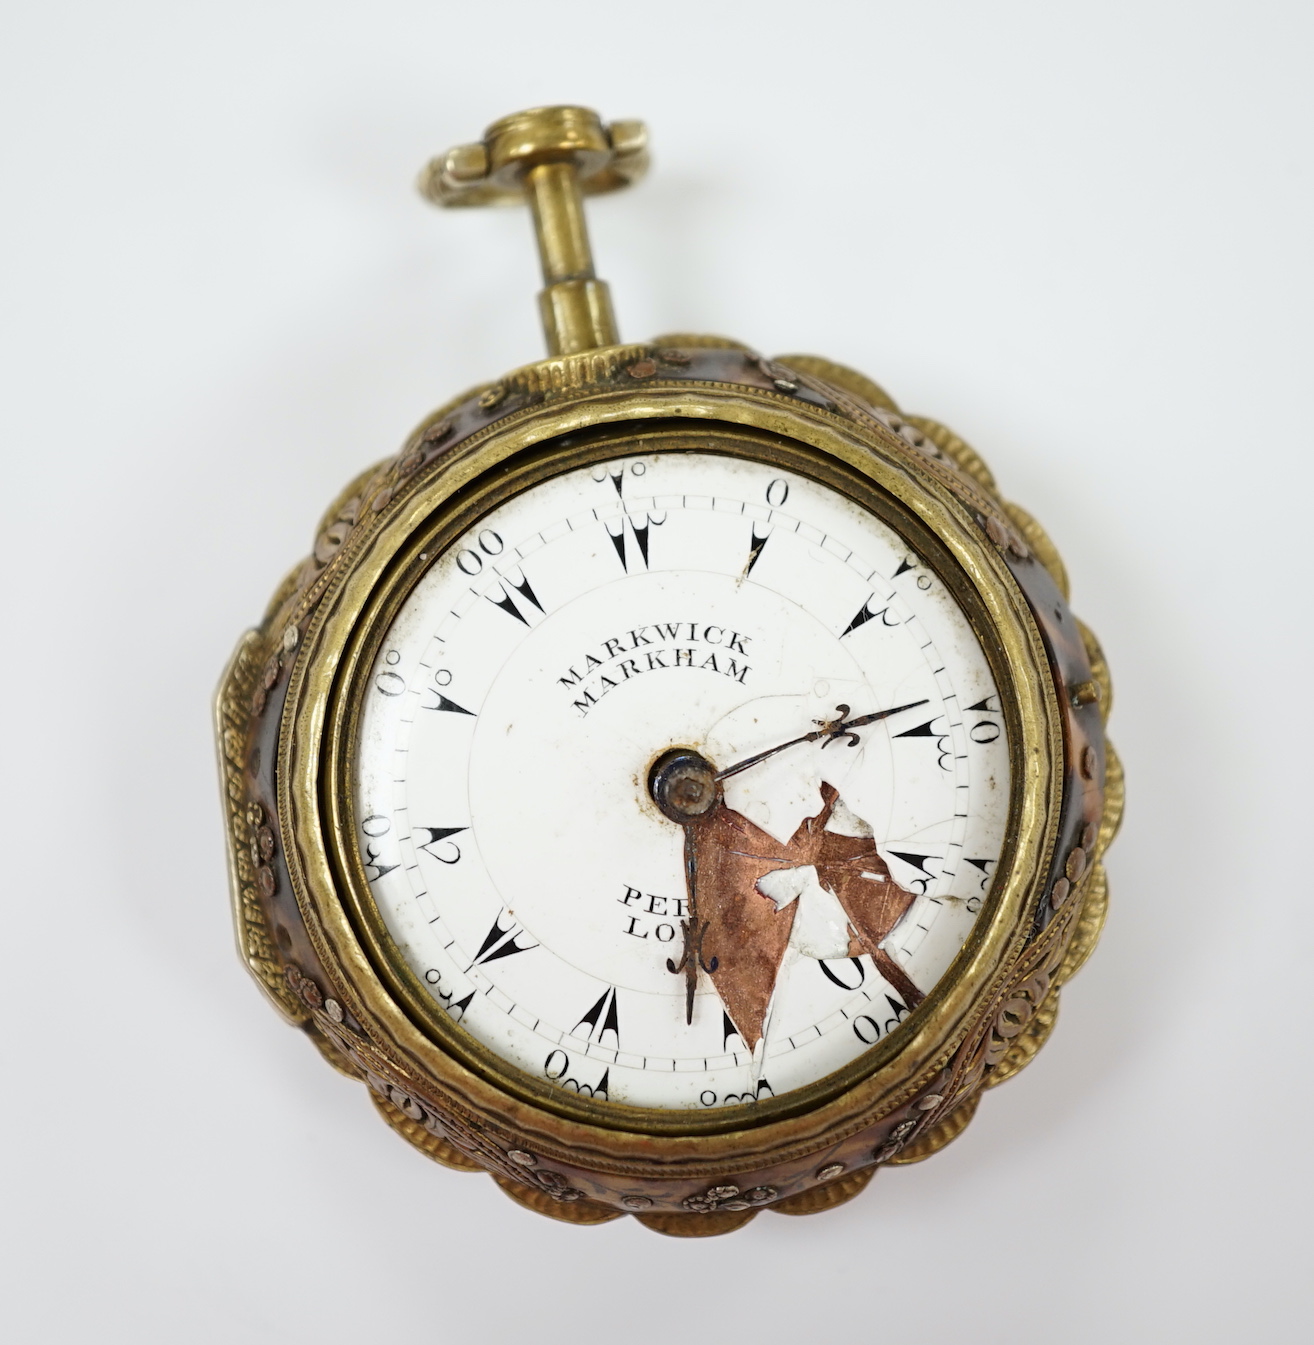 A late 18th century gilt metal and painted tortoiseshell mounted pair cased repeating pocket watch, made for the Turkish market, by Markwick Markham Perigal, London (a.f.).